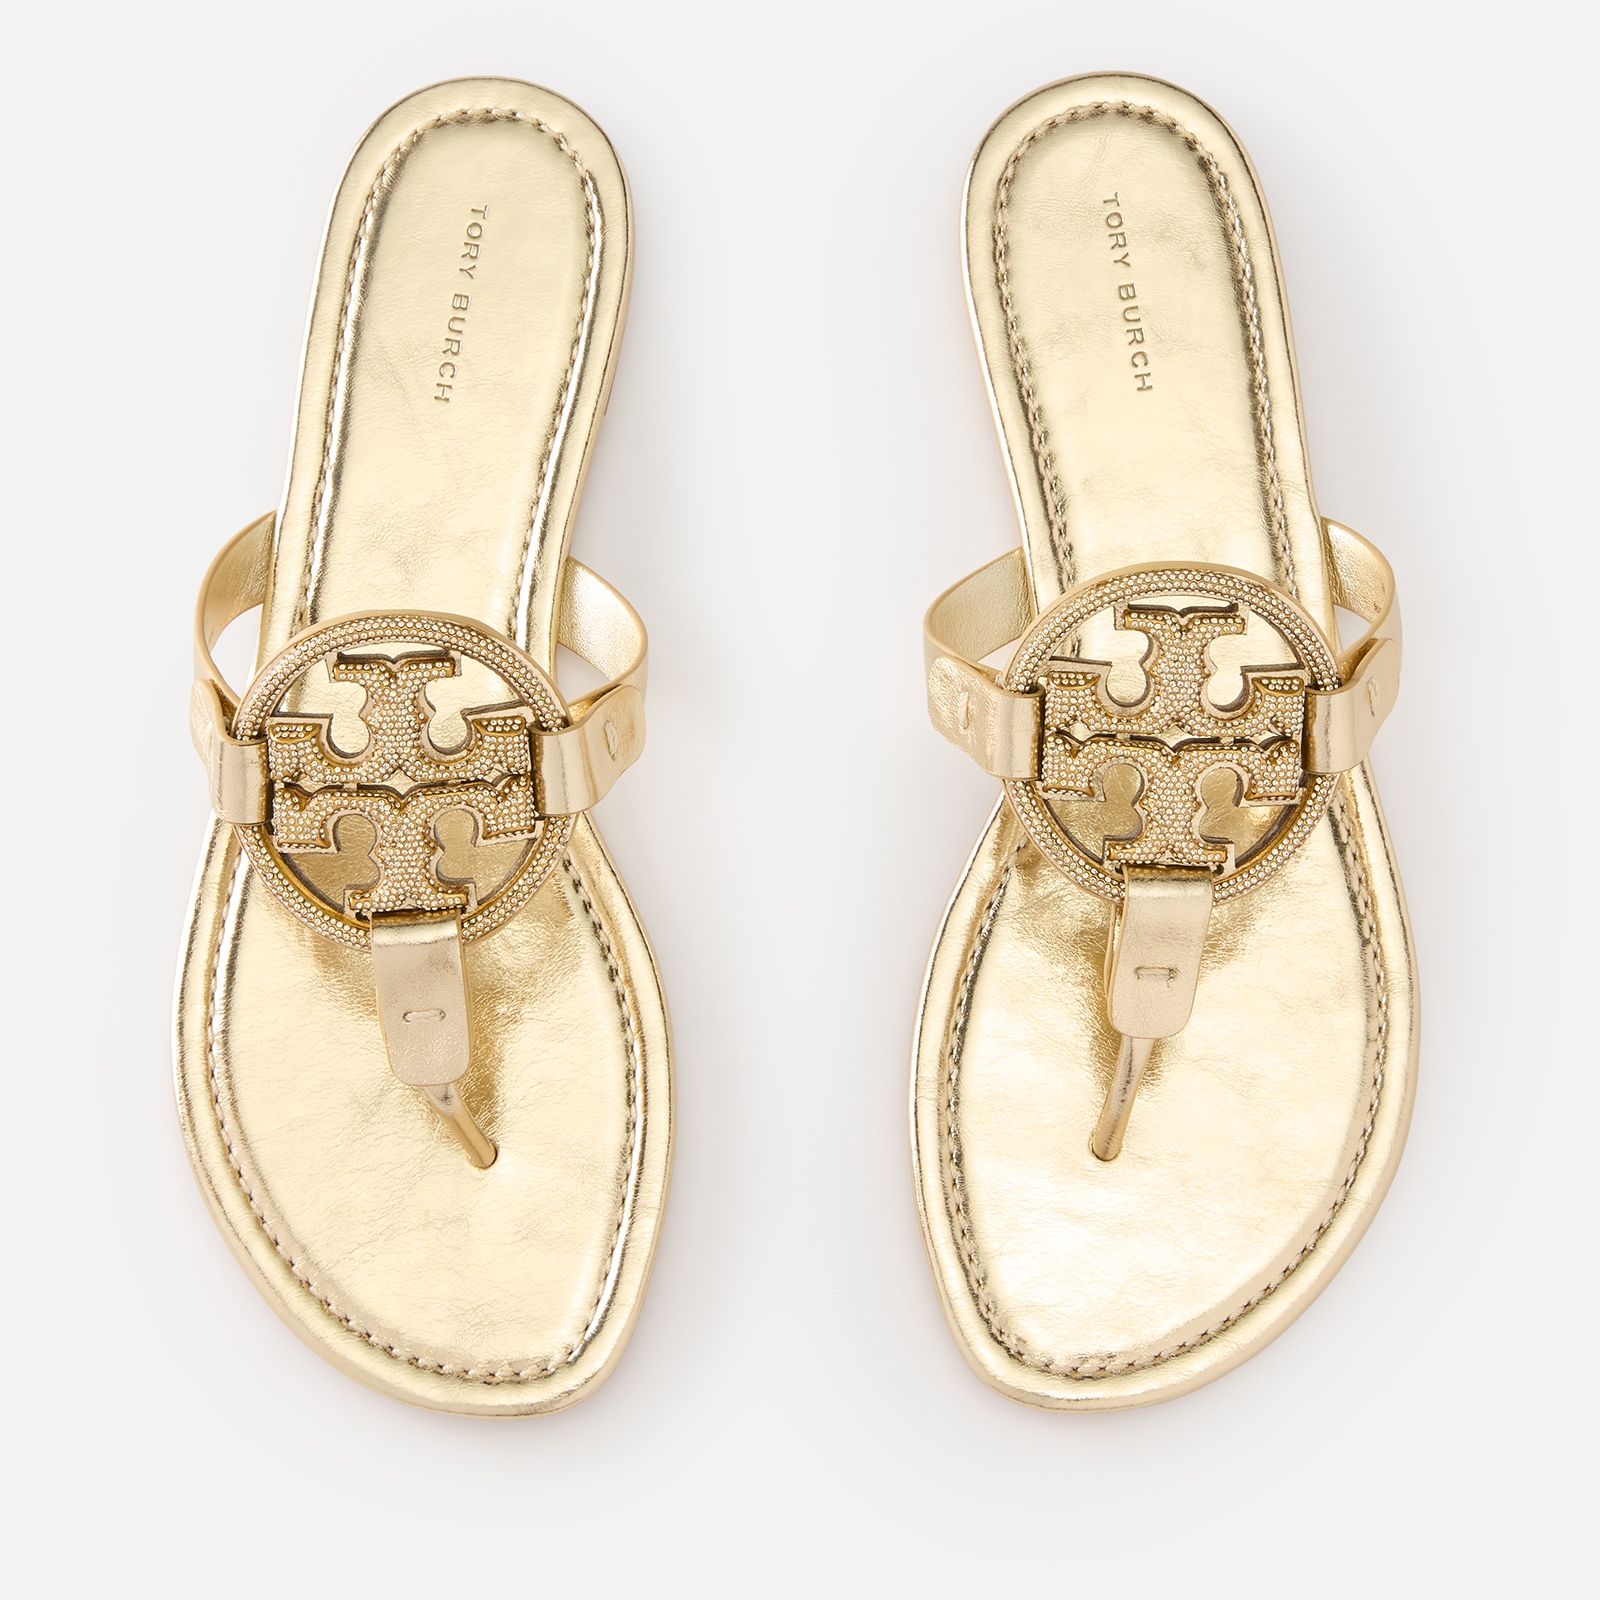 Tory Burch Women’s Miller Embellished Leather Sandals